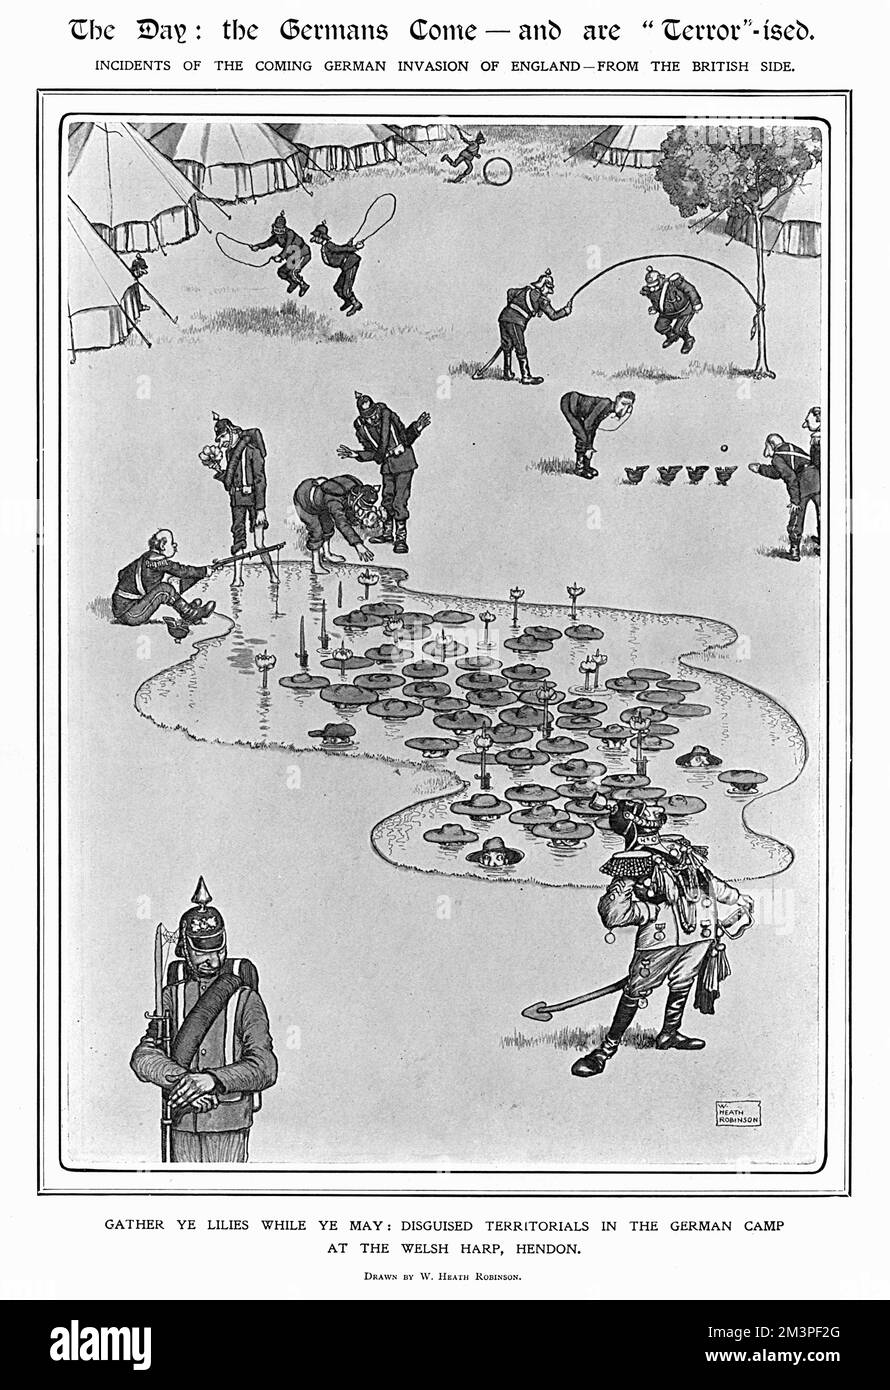 'The Day: The Germans Come - and are &quot;Terror-ised&quot;. Incidents of the Coming German Invasion of England-from the British side, by Heath Robinson. Gather ye lilies while ye may: disguised territorials in the German camp at the Welsh harp, Hendo.' Series of cartoons by William Heath Robinson in The Sketch.     Date: 1910 Stock Photo